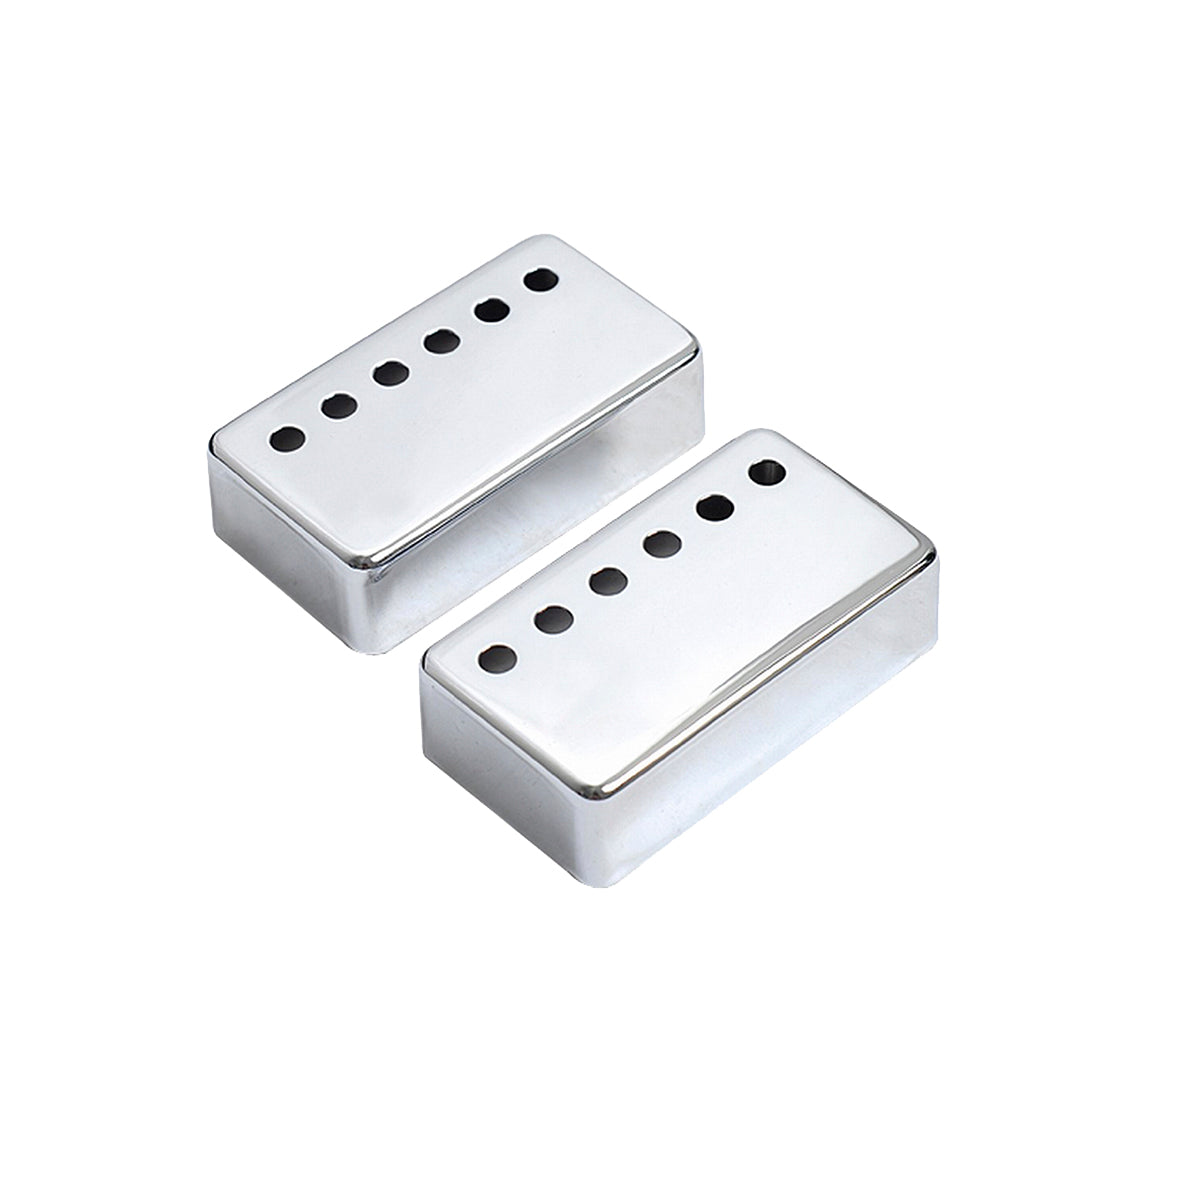 Musiclily 52mm Metal Humbucker Guitar Pickup Covers for Electric Guitar Bridge, Chrome (2 Pieces)